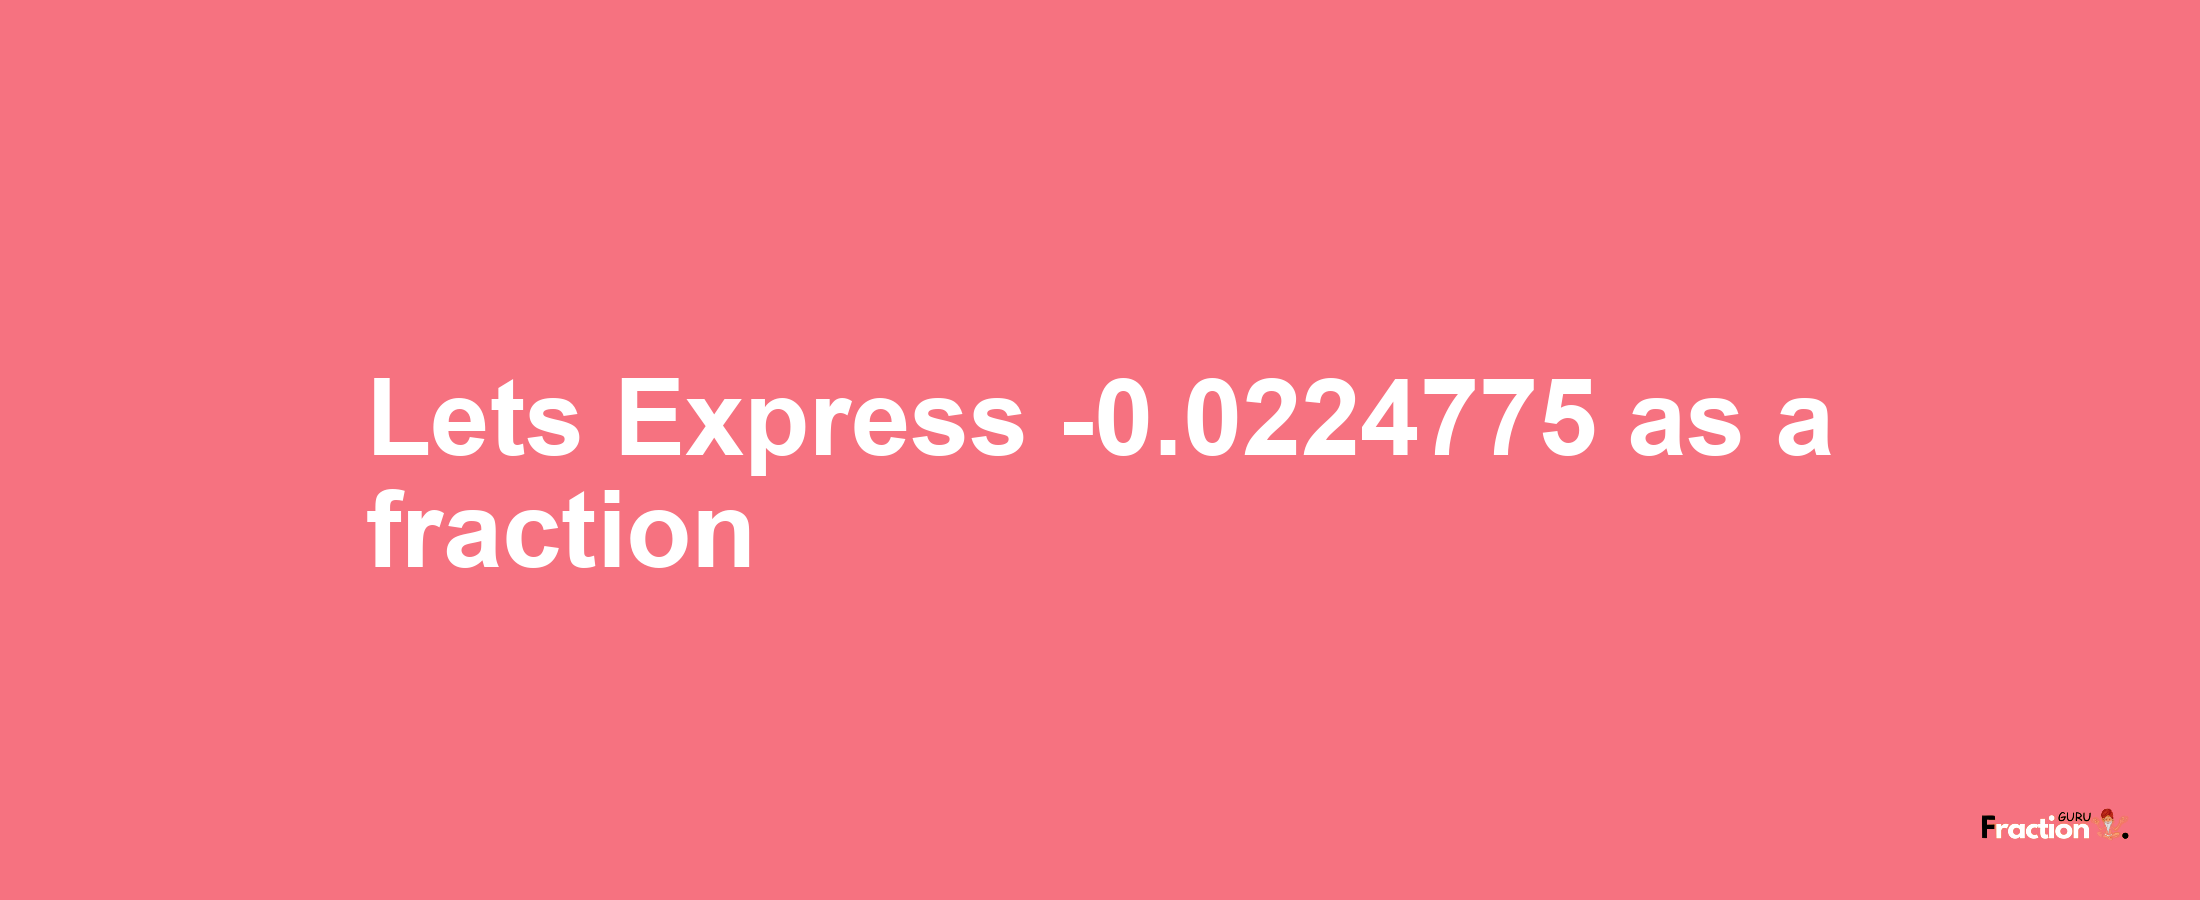 Lets Express -0.0224775 as afraction